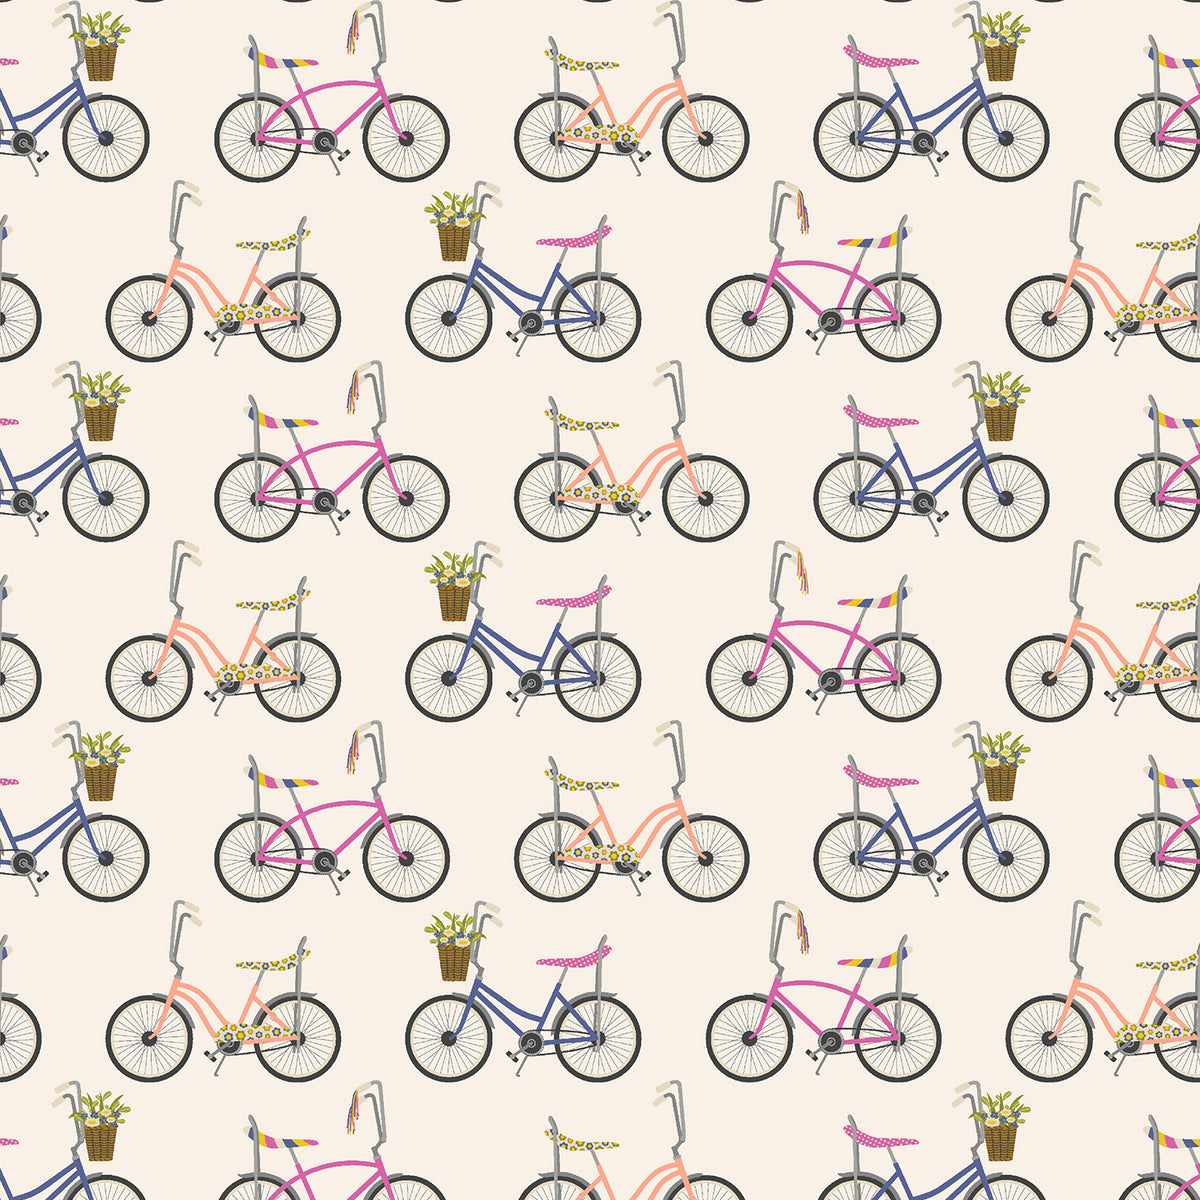 East Coast Quilt Fabric - Kickstand Bicycles in Play Date Cream/Multi - MK101-PD1